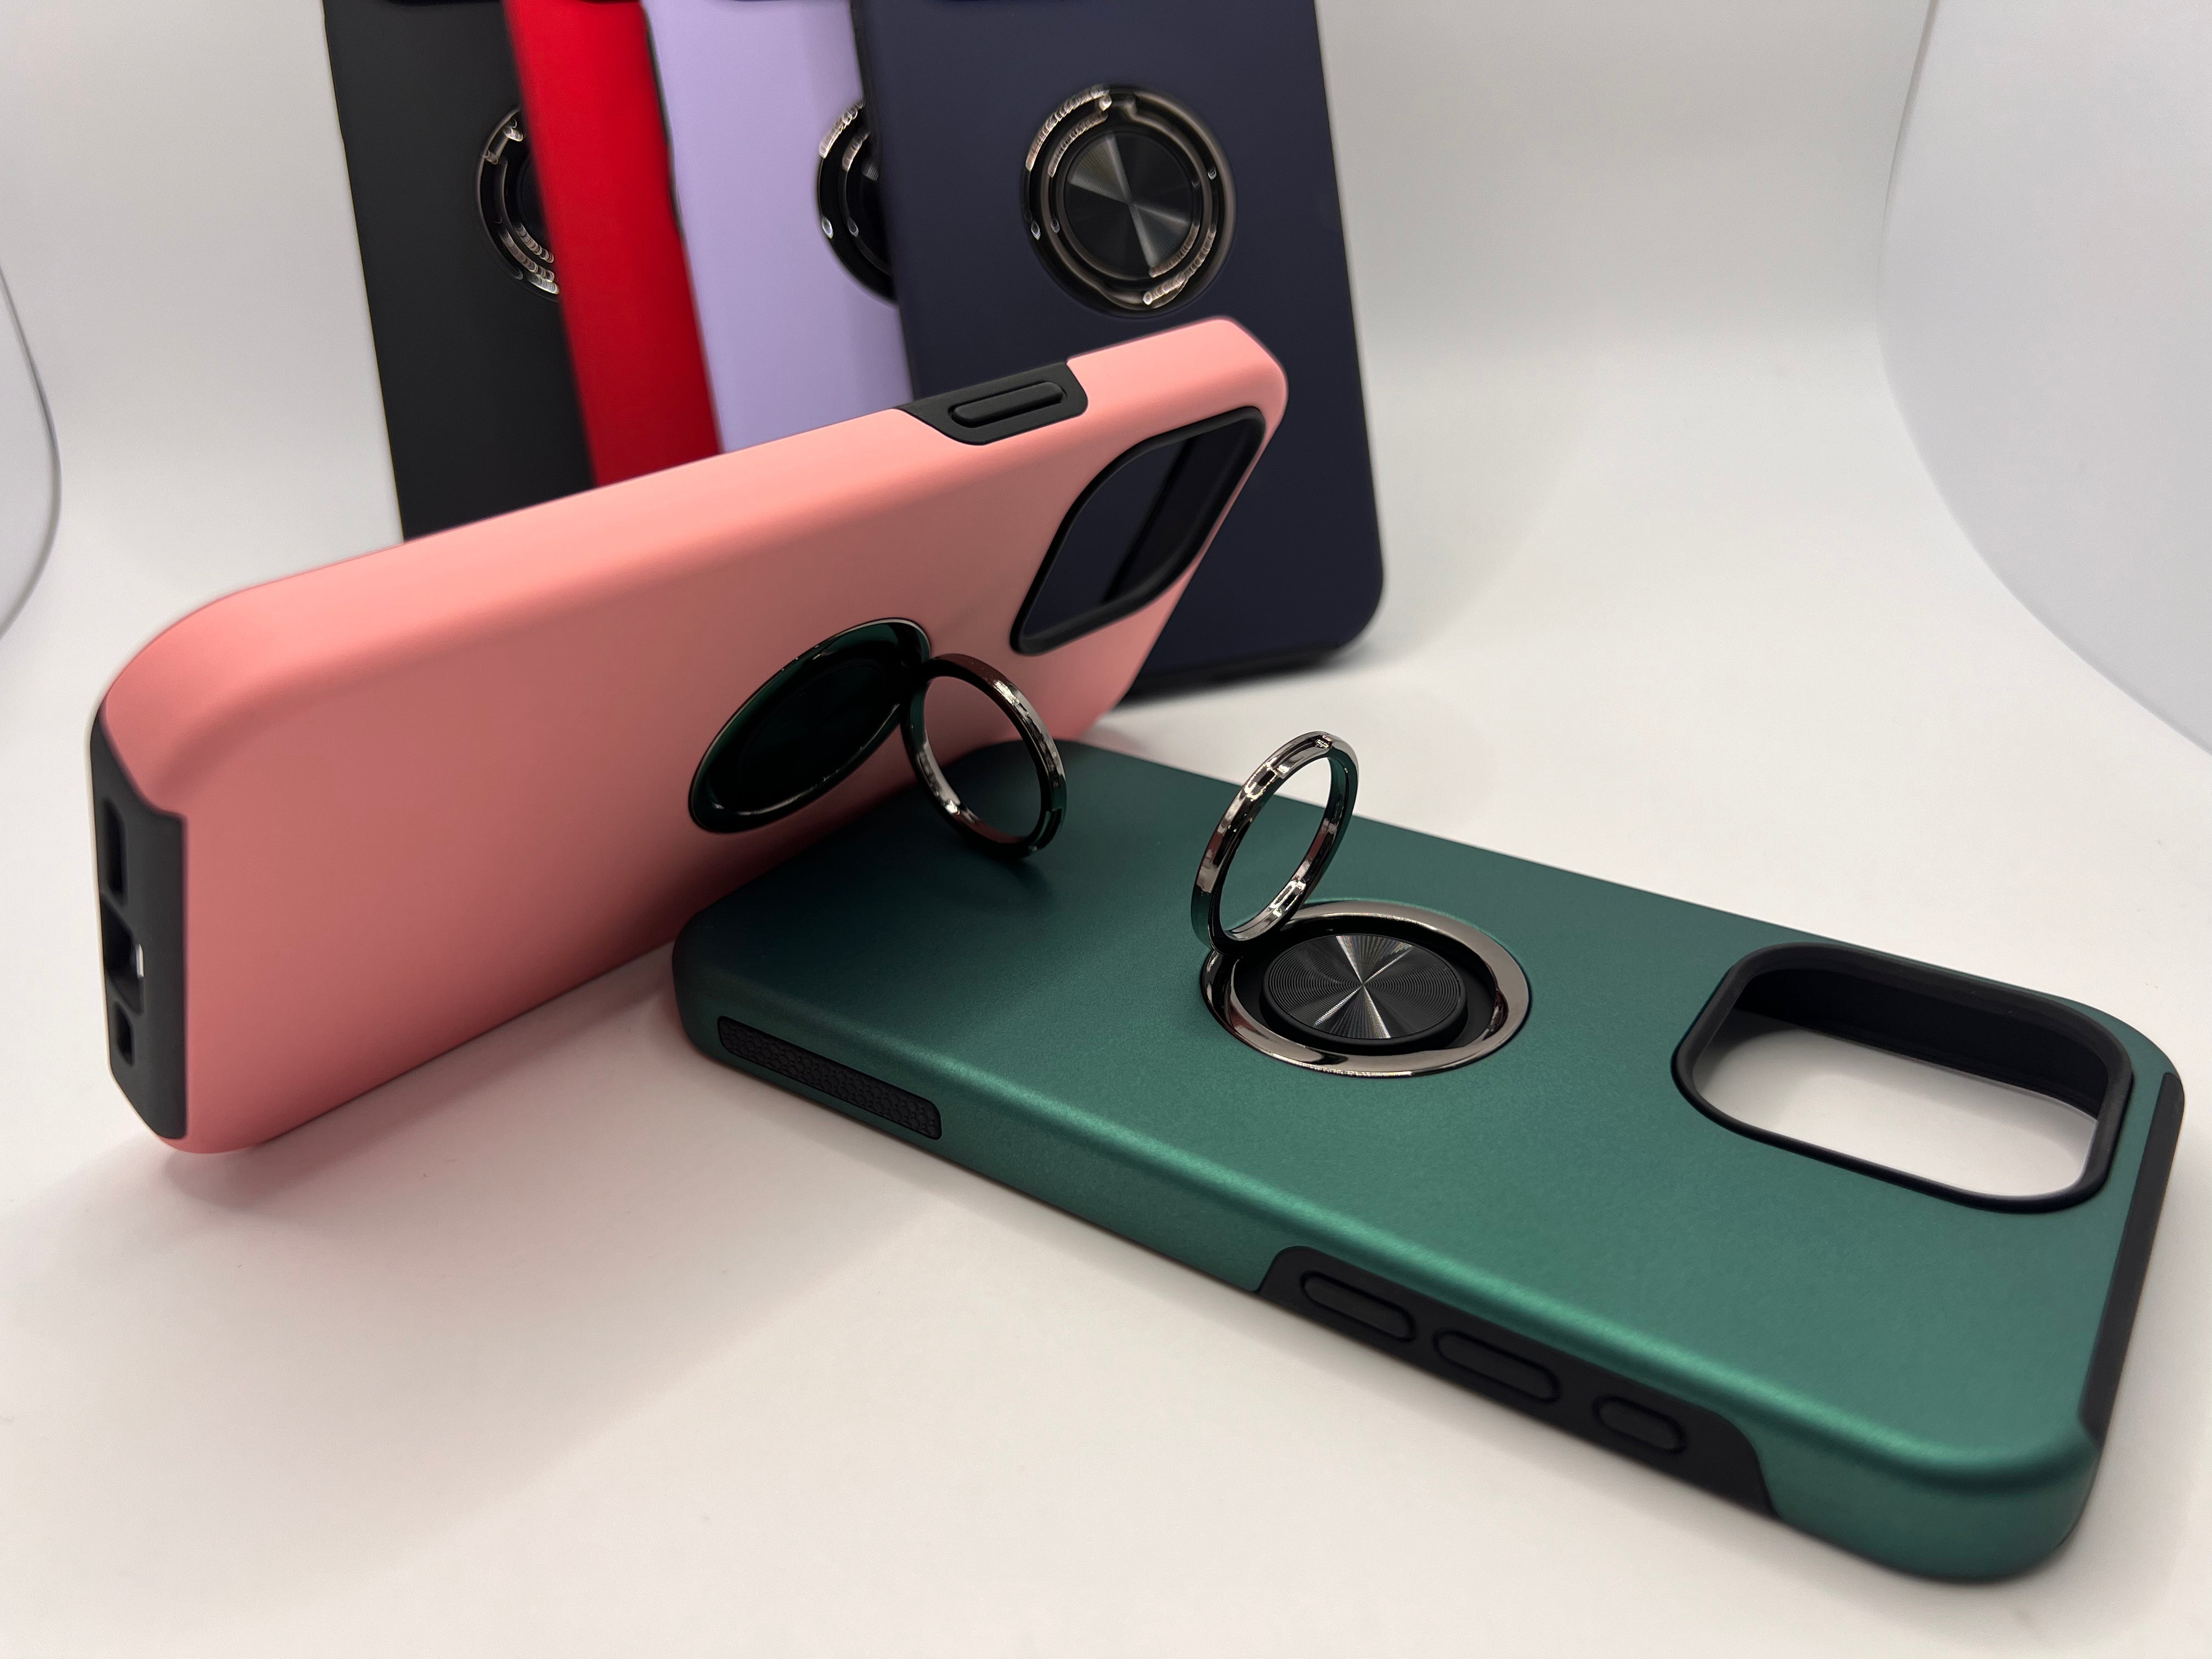 iPhone XS Max Round Ring Back Case